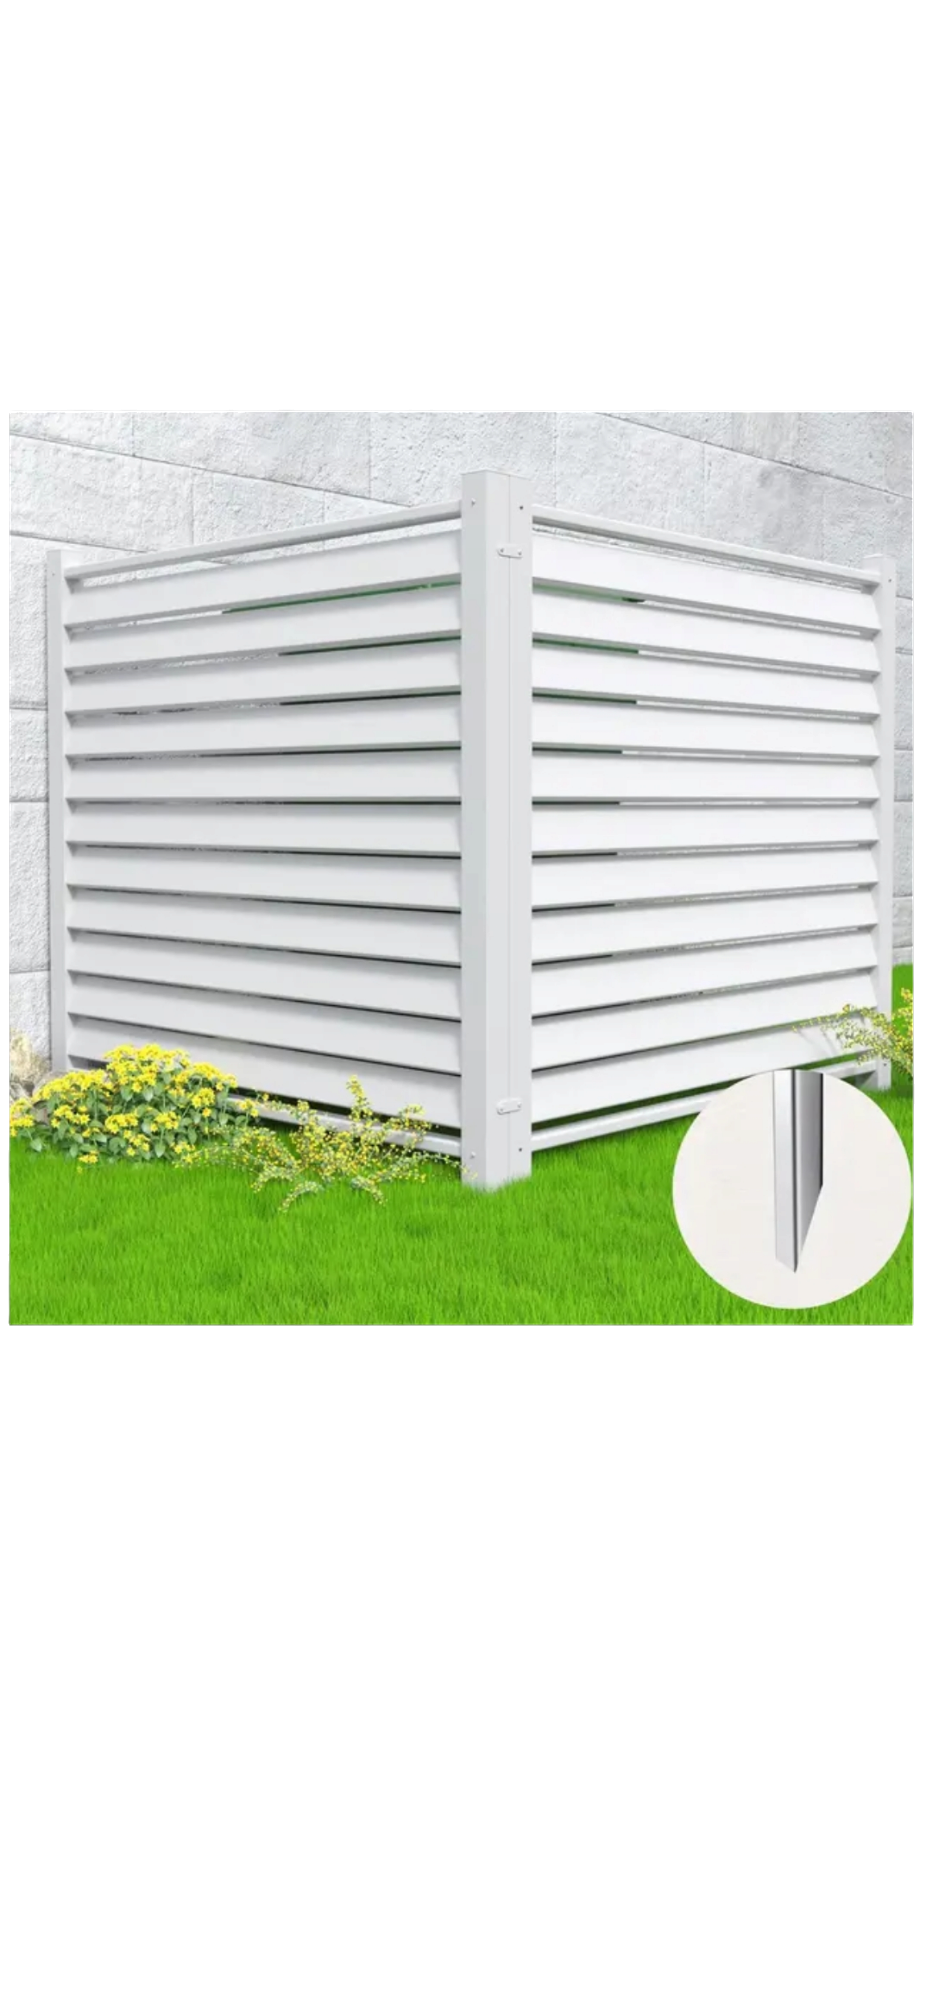 A white louvered enclosure, serving as a Condenser Fence product called Privacy Shield Fence Panels - Hide Unsightly Outdoor Equipment with Ease, is set up on a lush green lawn near a concrete wall. Yellow flowers and bushes bloom at its base. An inset close-up shows the corner details of the weather-resistant slats and support structure.